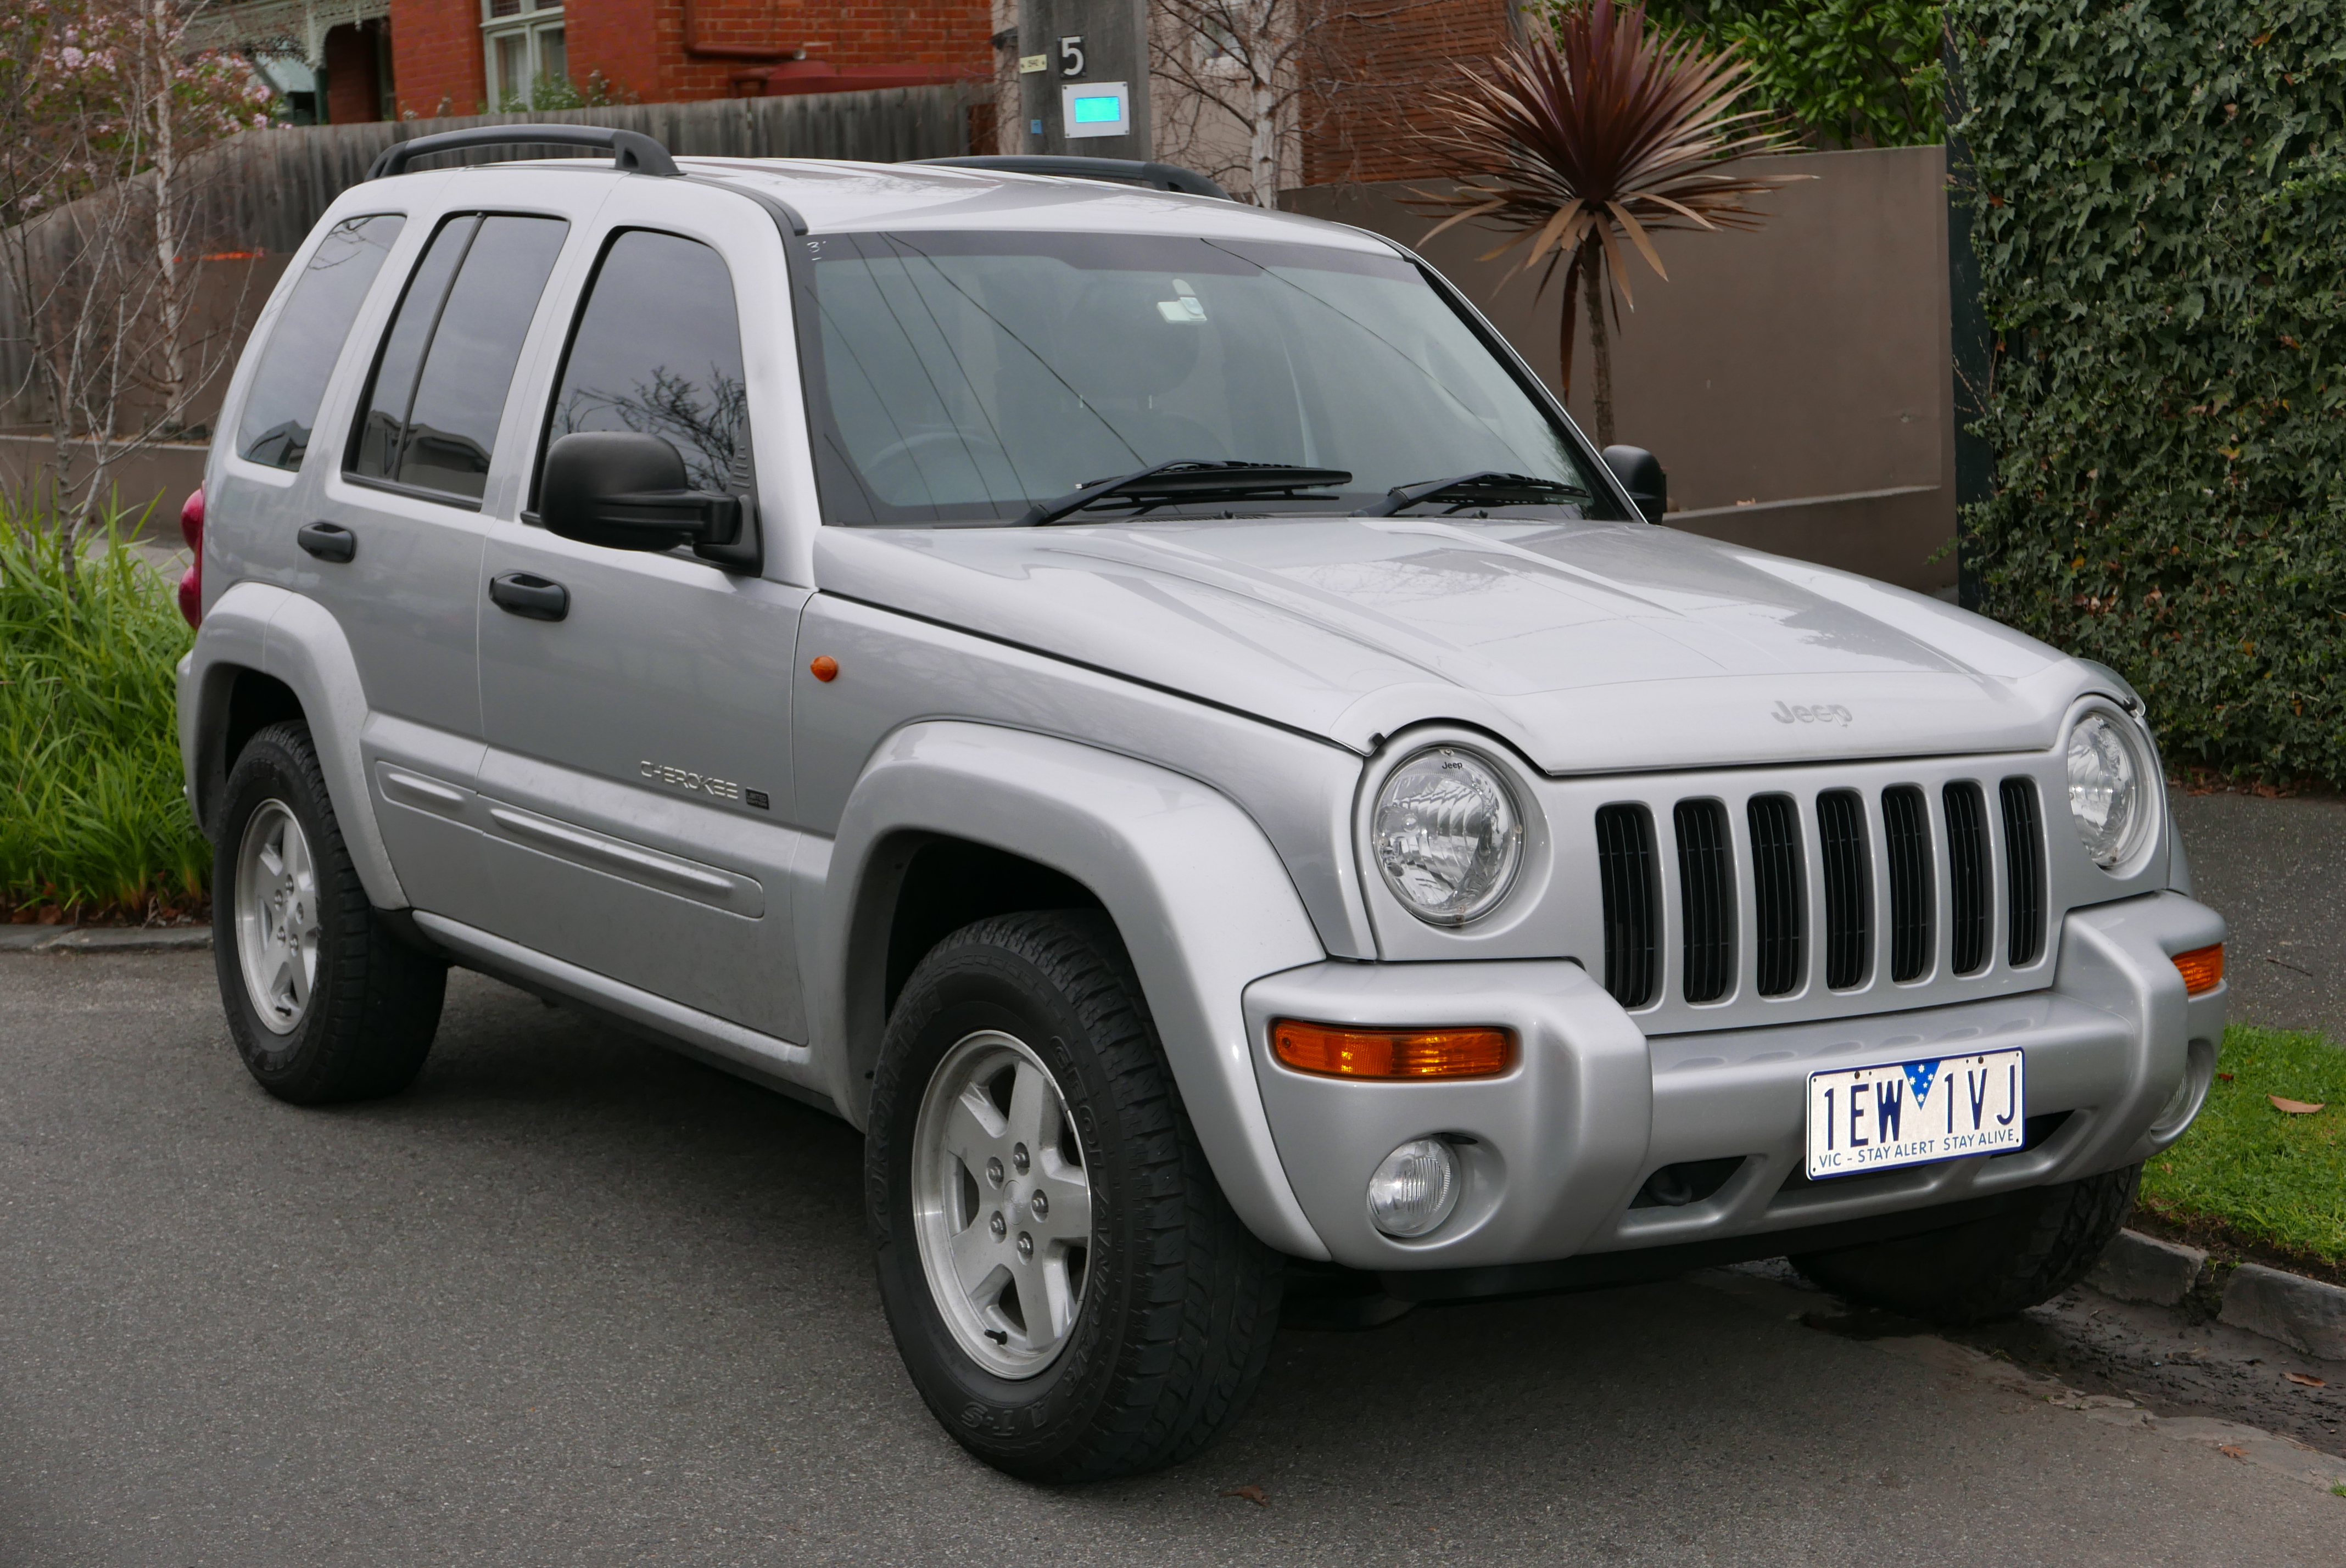 Chicago Adult Models Jeep Liberty Model History